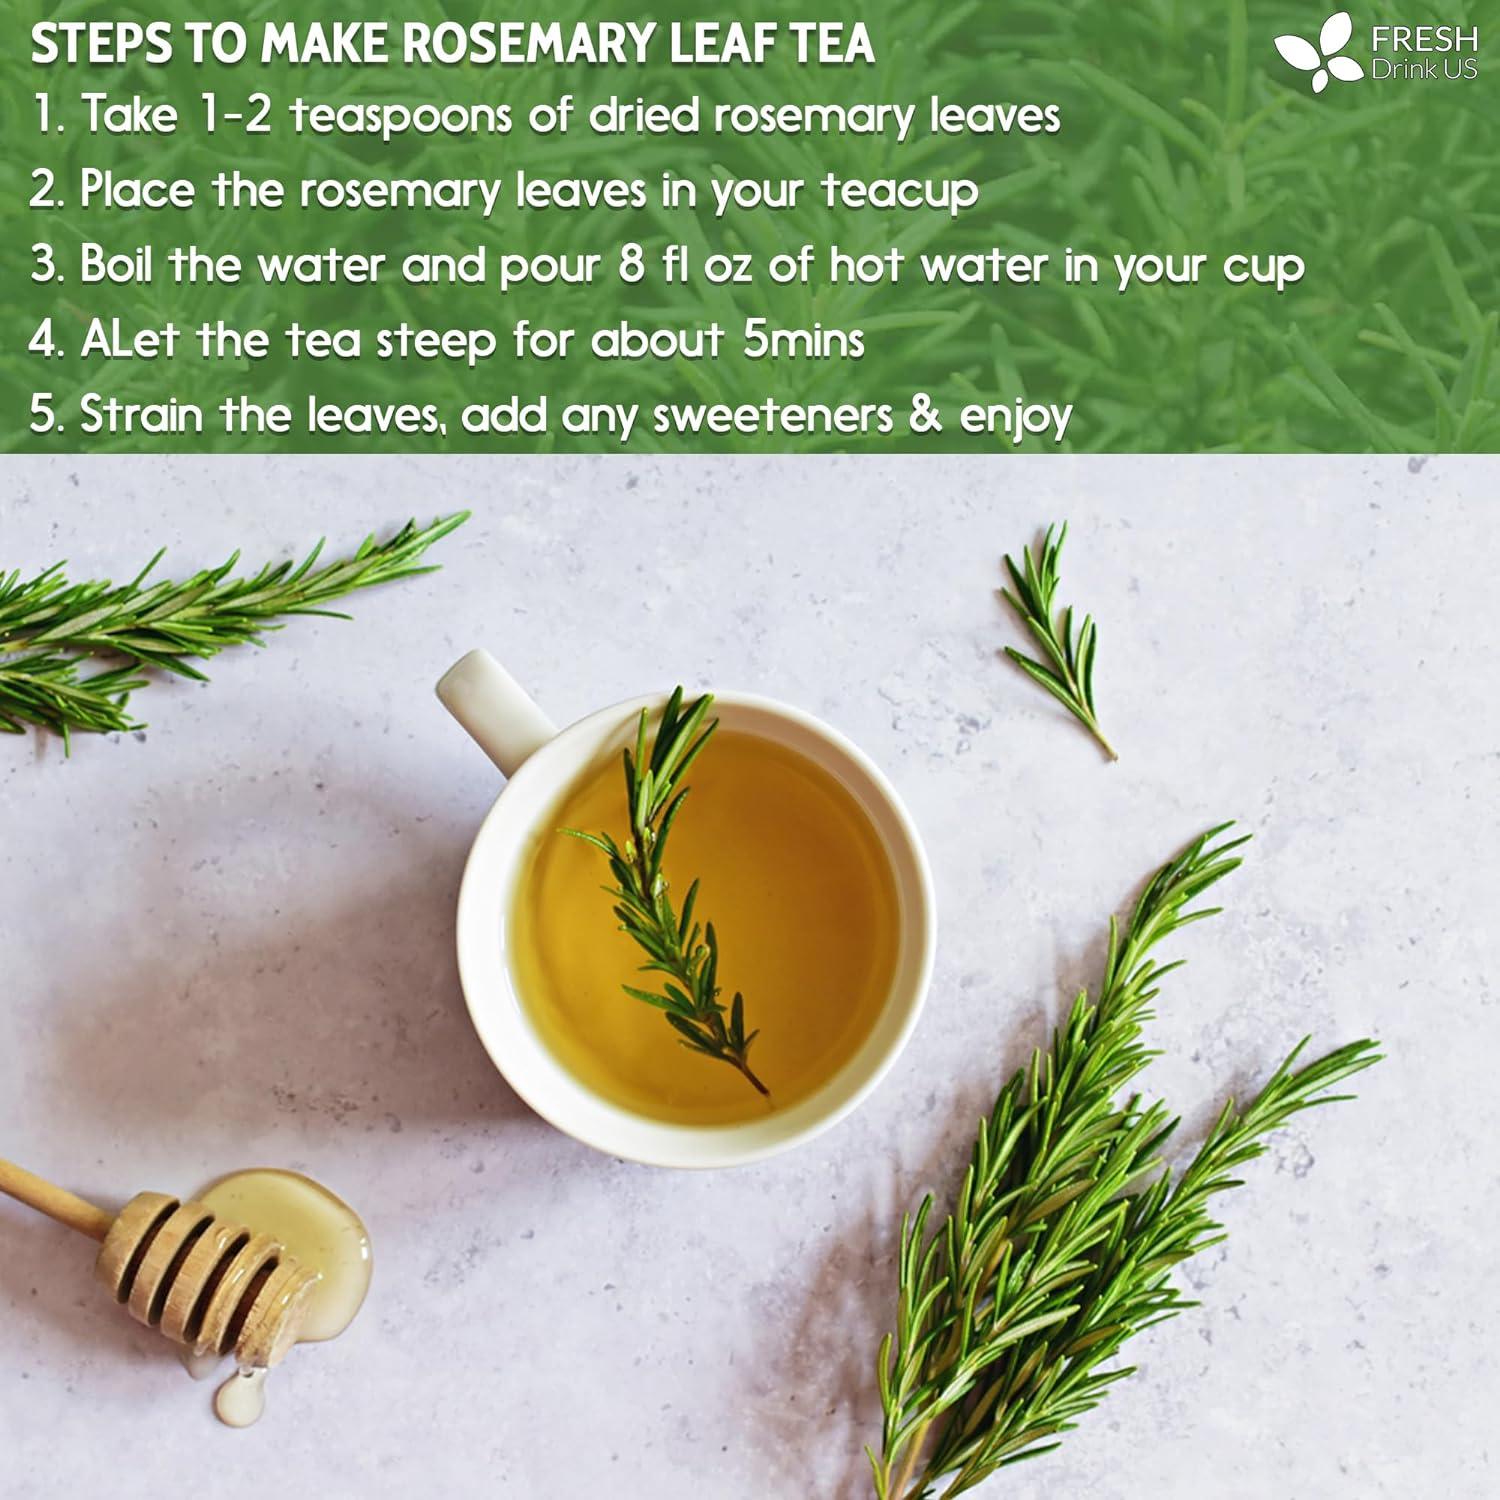 Premium Rosemary Leaves, Tea Bags, Powder, 100% Natural & Pure from Dried Rosemary Leaves, No Additives, No Caffeine, Vegan. Dried Rosemary Herb, Perfect for Seasoning, Spice Blends for Grilling & Cooking - FreshDrinkUS - Natural and Premium Herbal Tea